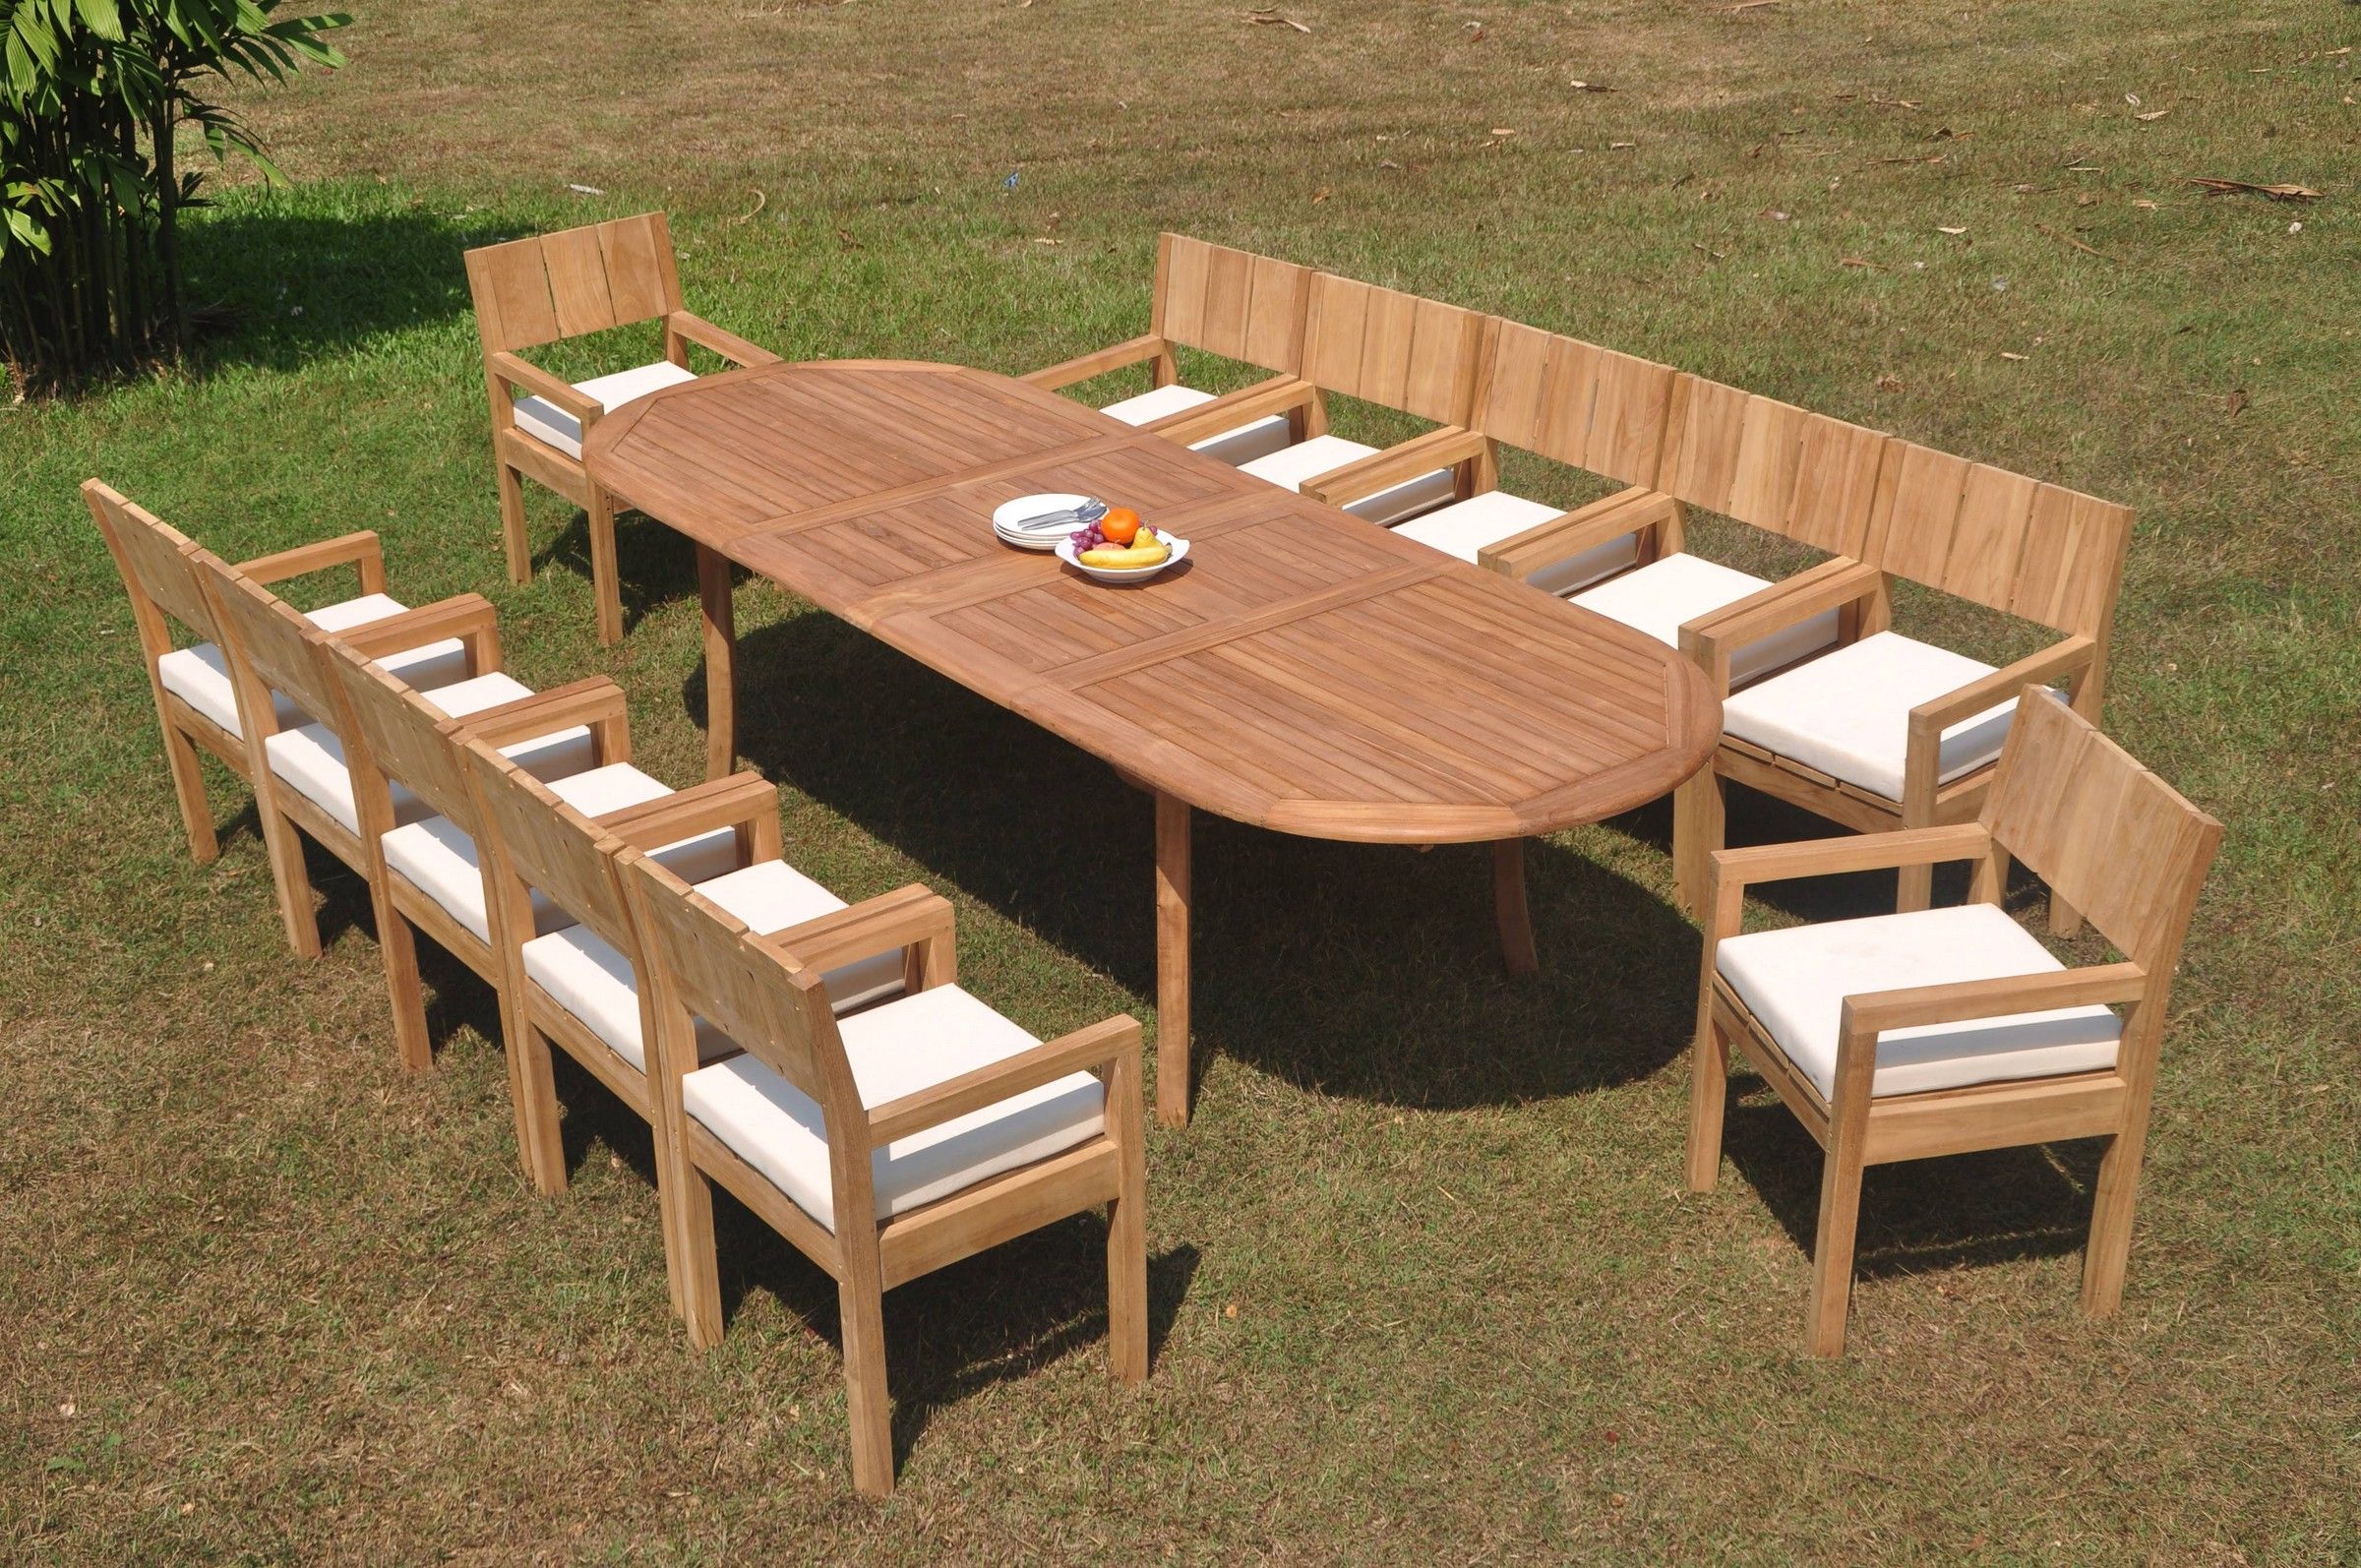 Grade A Teak Dining Set: 12 Seater 13 Pc: 118" Double Extension Oval Pertaining To Most Current Teak Folding Chair Patio Dining Sets (View 9 of 15)